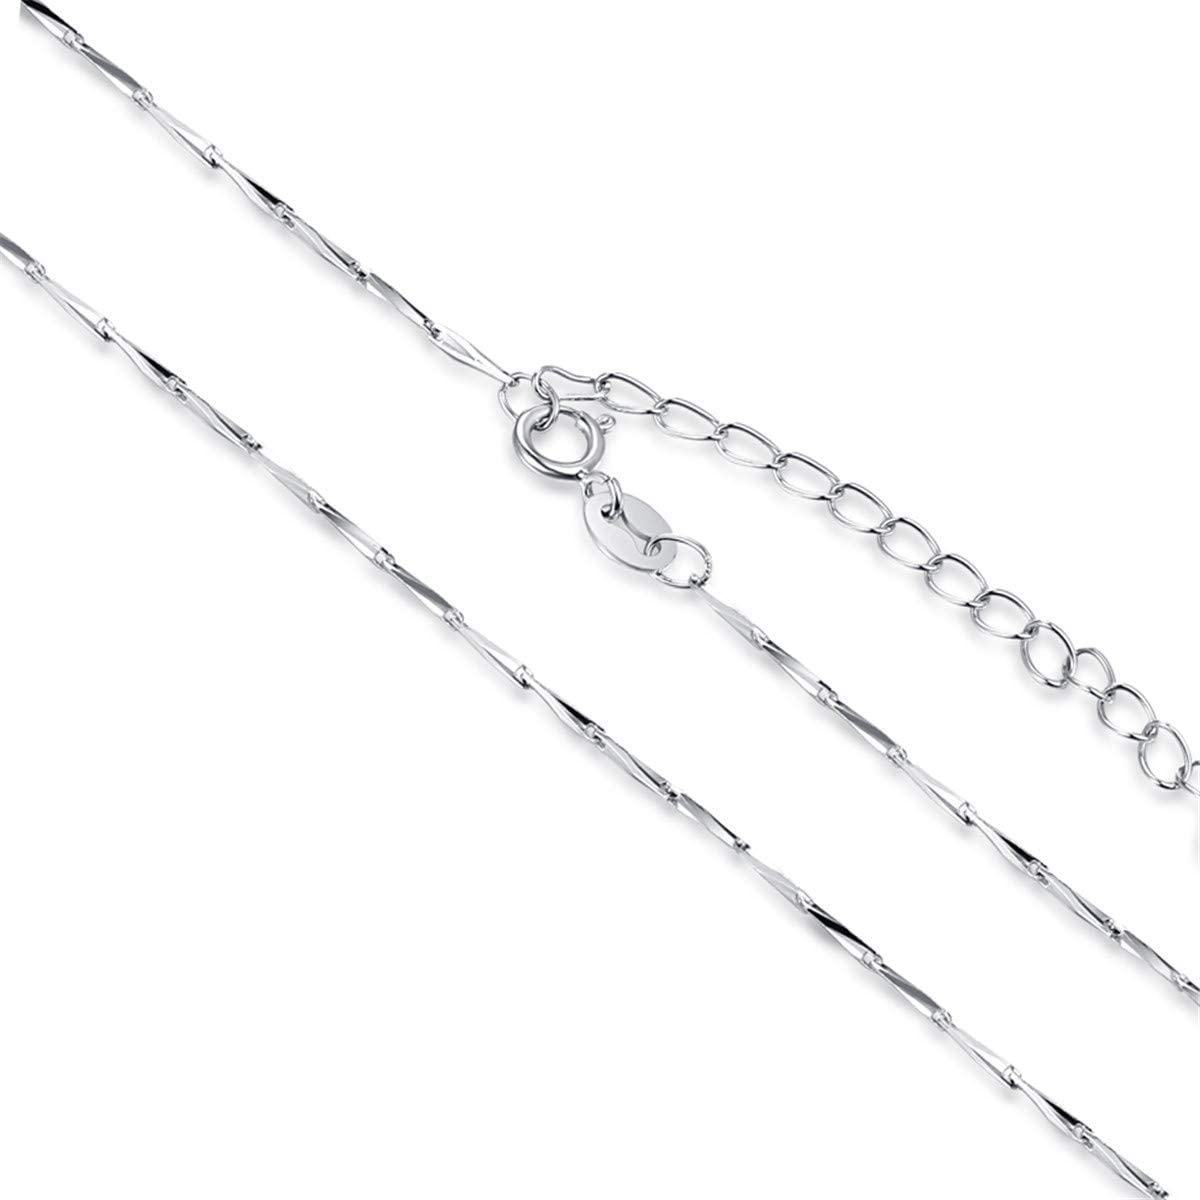 White Clear Austrian Crystal Pendant W/925 Sterlling Silver Hypoallergenic Chain Necklace